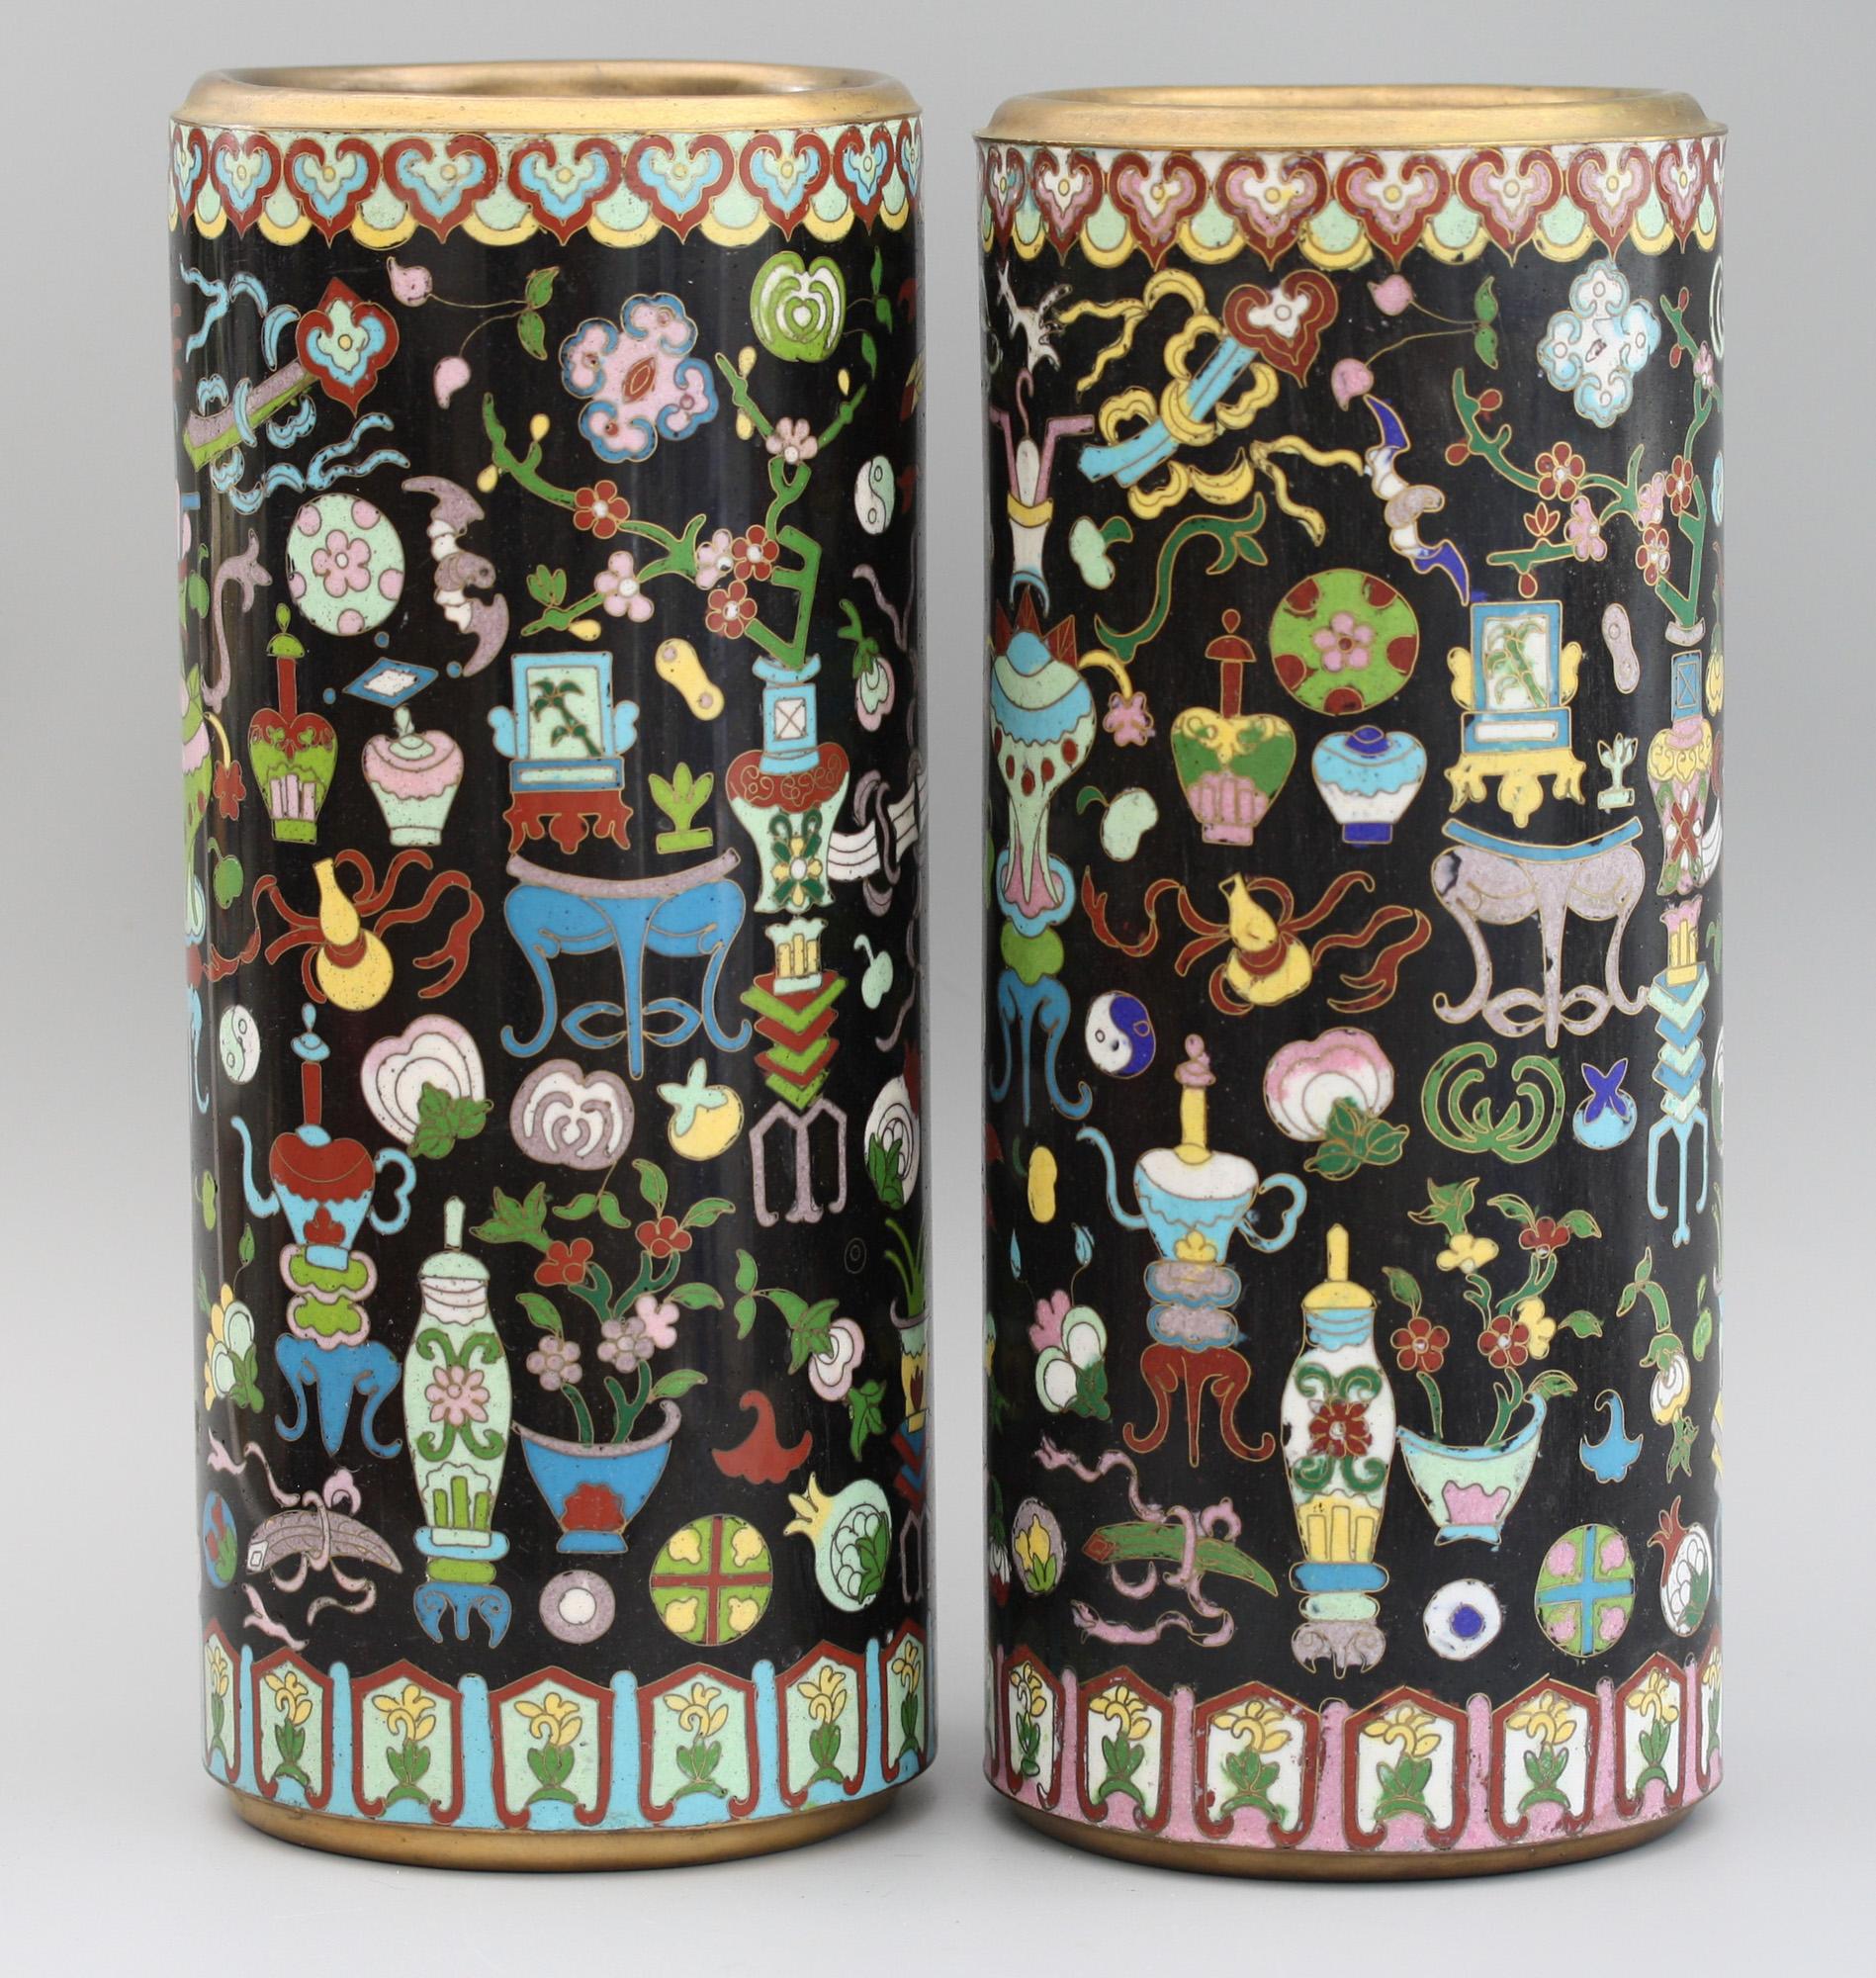 Pair of Chinese Cloisonné Cylindrical Precious Object Vases In Good Condition For Sale In Bishop's Stortford, Hertfordshire